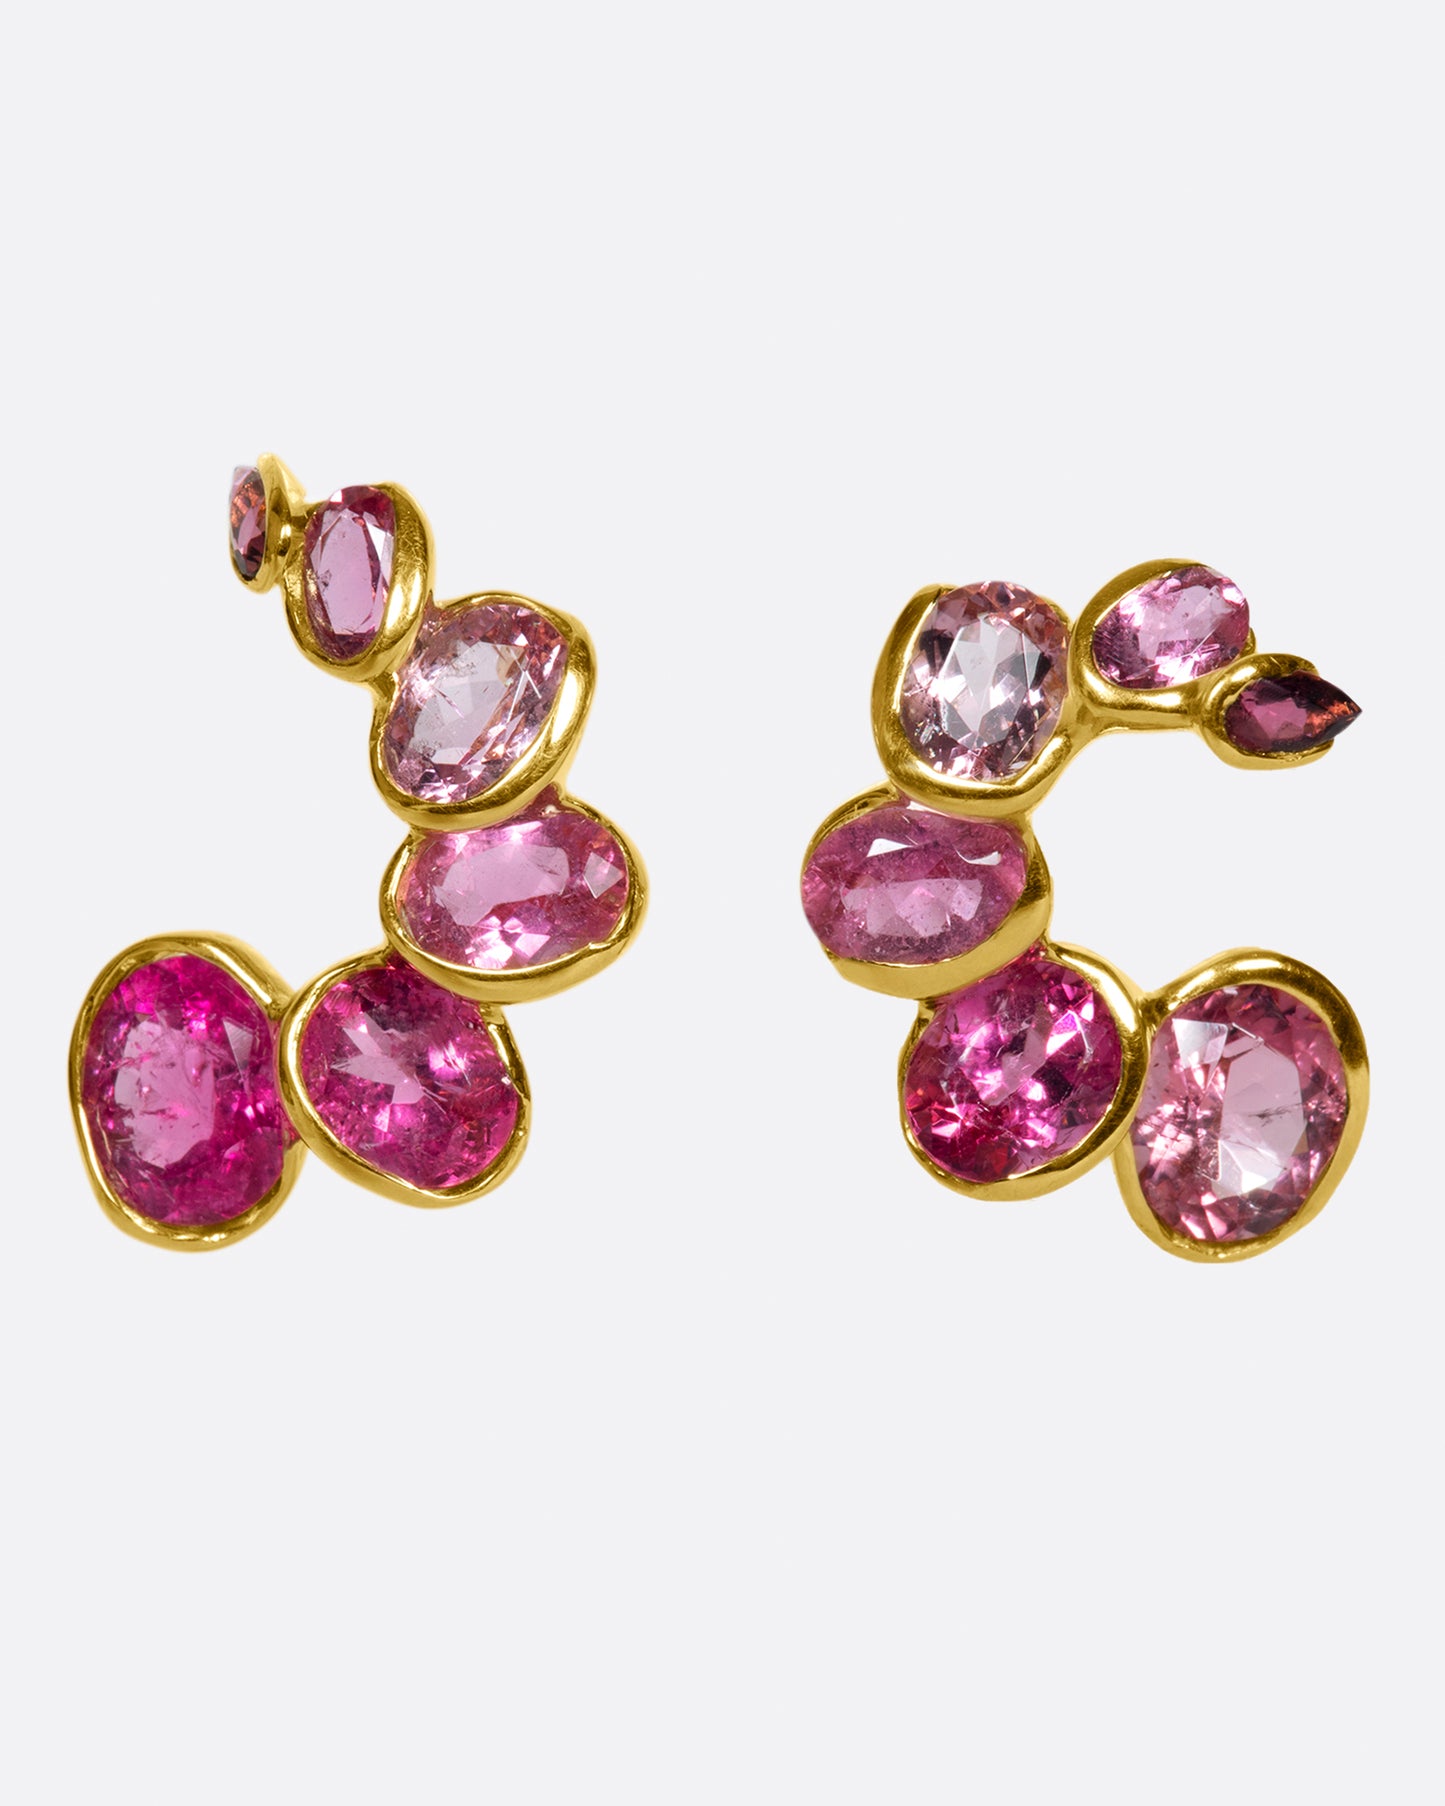 A pair of curved earrings with ombré pink tourmalines, shown from the front.